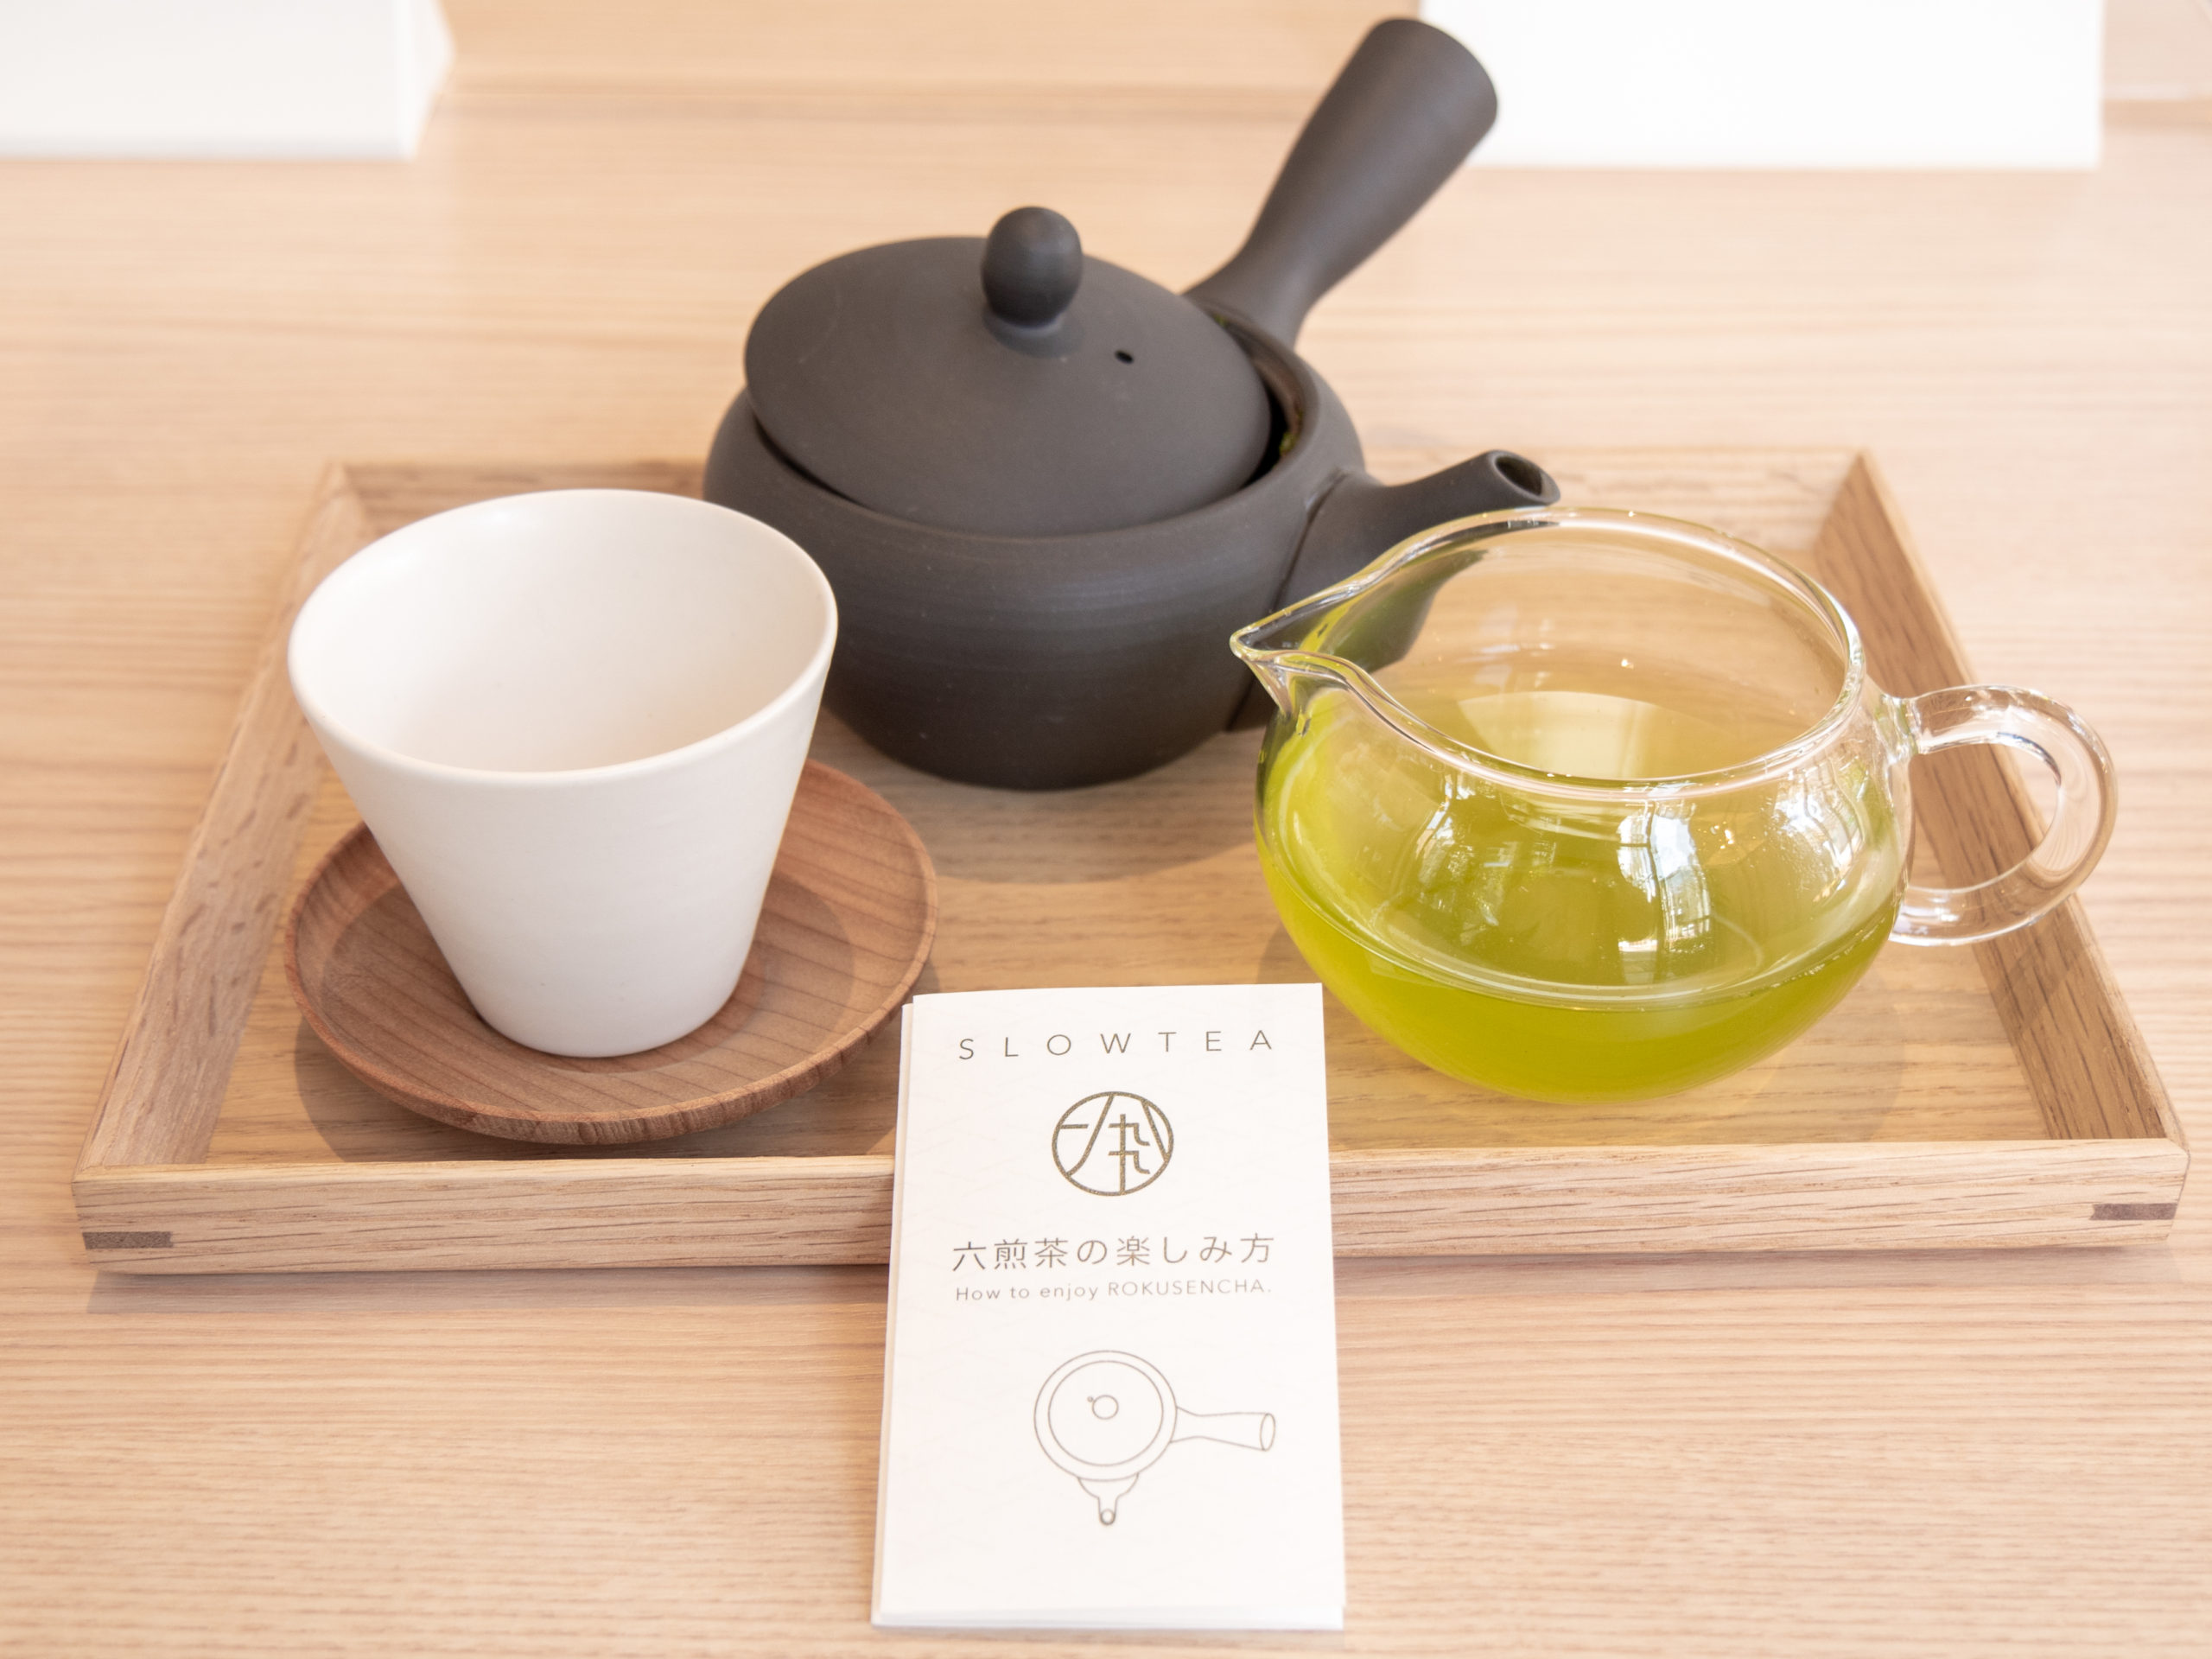 A blend of 6 types of sencha I’m lost in my own world as I enjoy the sweet aftertaste that this mild green tea provides when Director and General Manager Tomoharu Katsuno-san comes to greet me. 